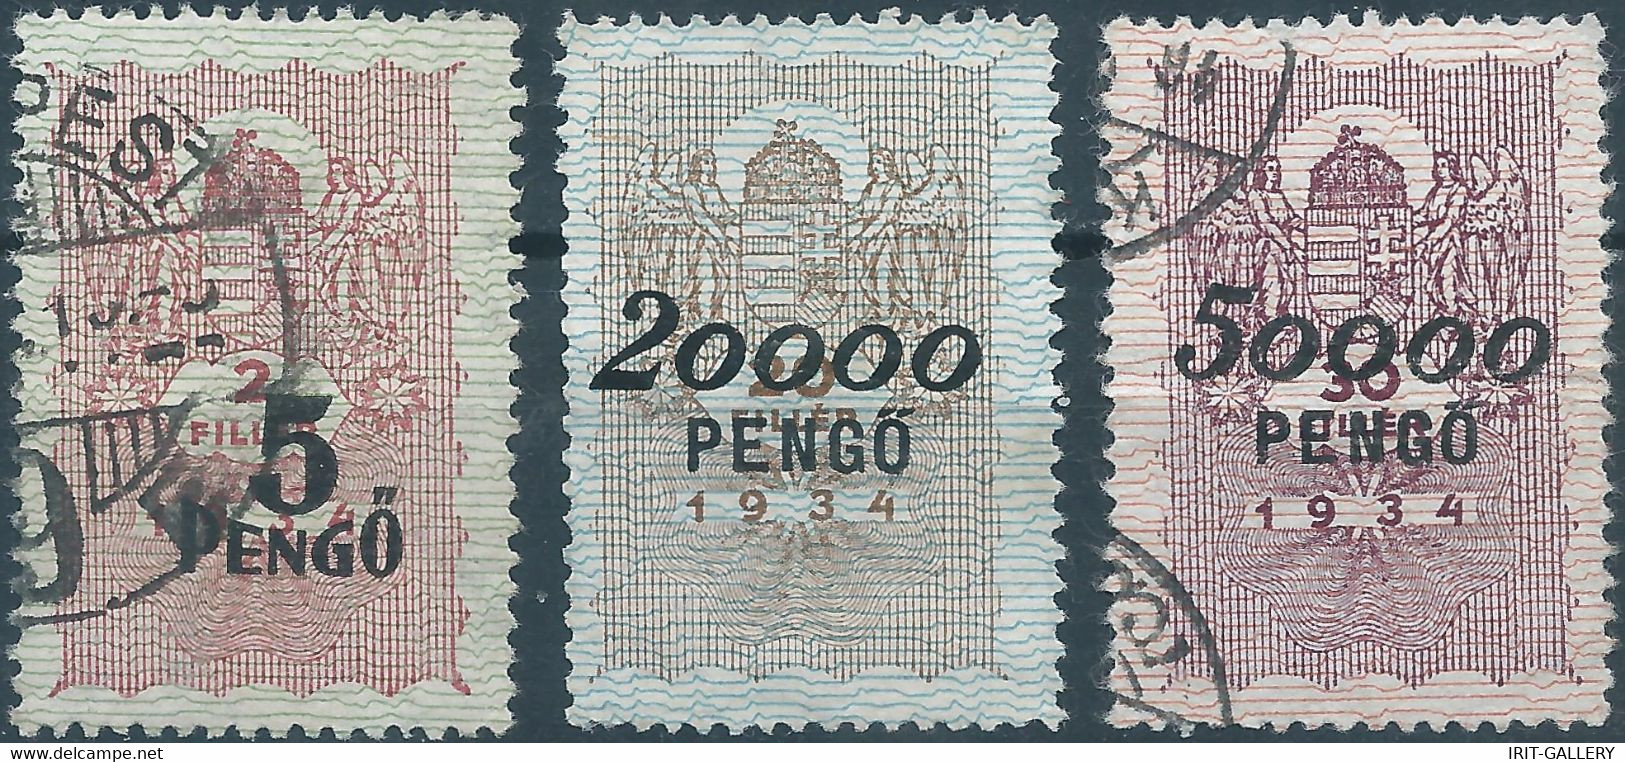 Hungary1945 Revenue Stamps Fiscal Tax For Bill Of Exchange,Overprint On Stamps Of The1934-5Pengo & 20000 And 50000PENGO, - Fiscale Zegels